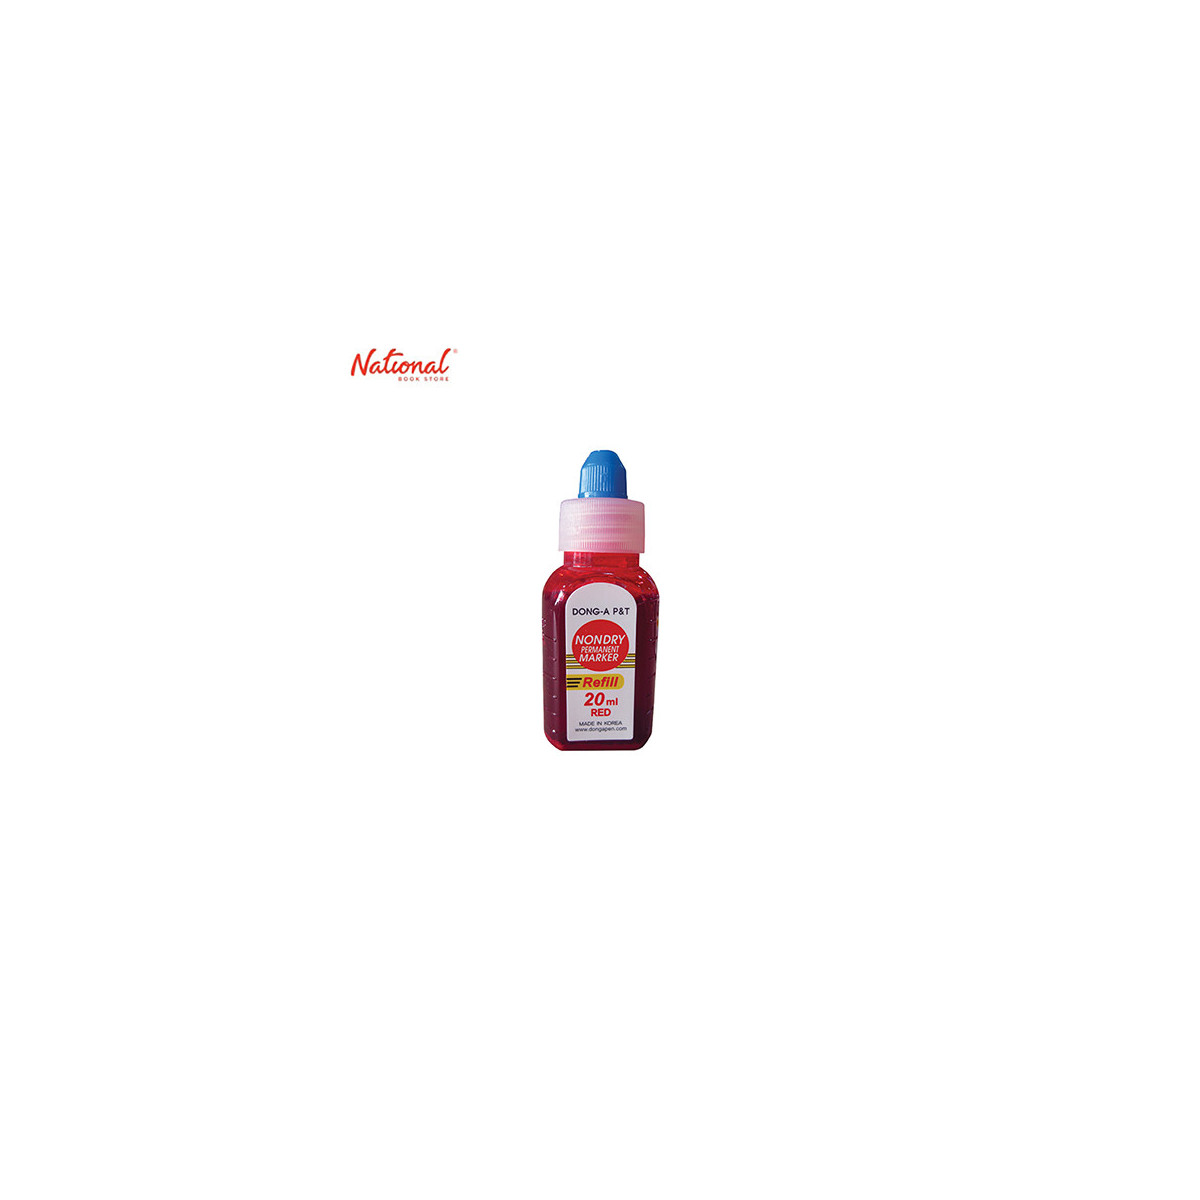 DONG-A PERMANENT MARKER INK BOTTLE   20ML, RED